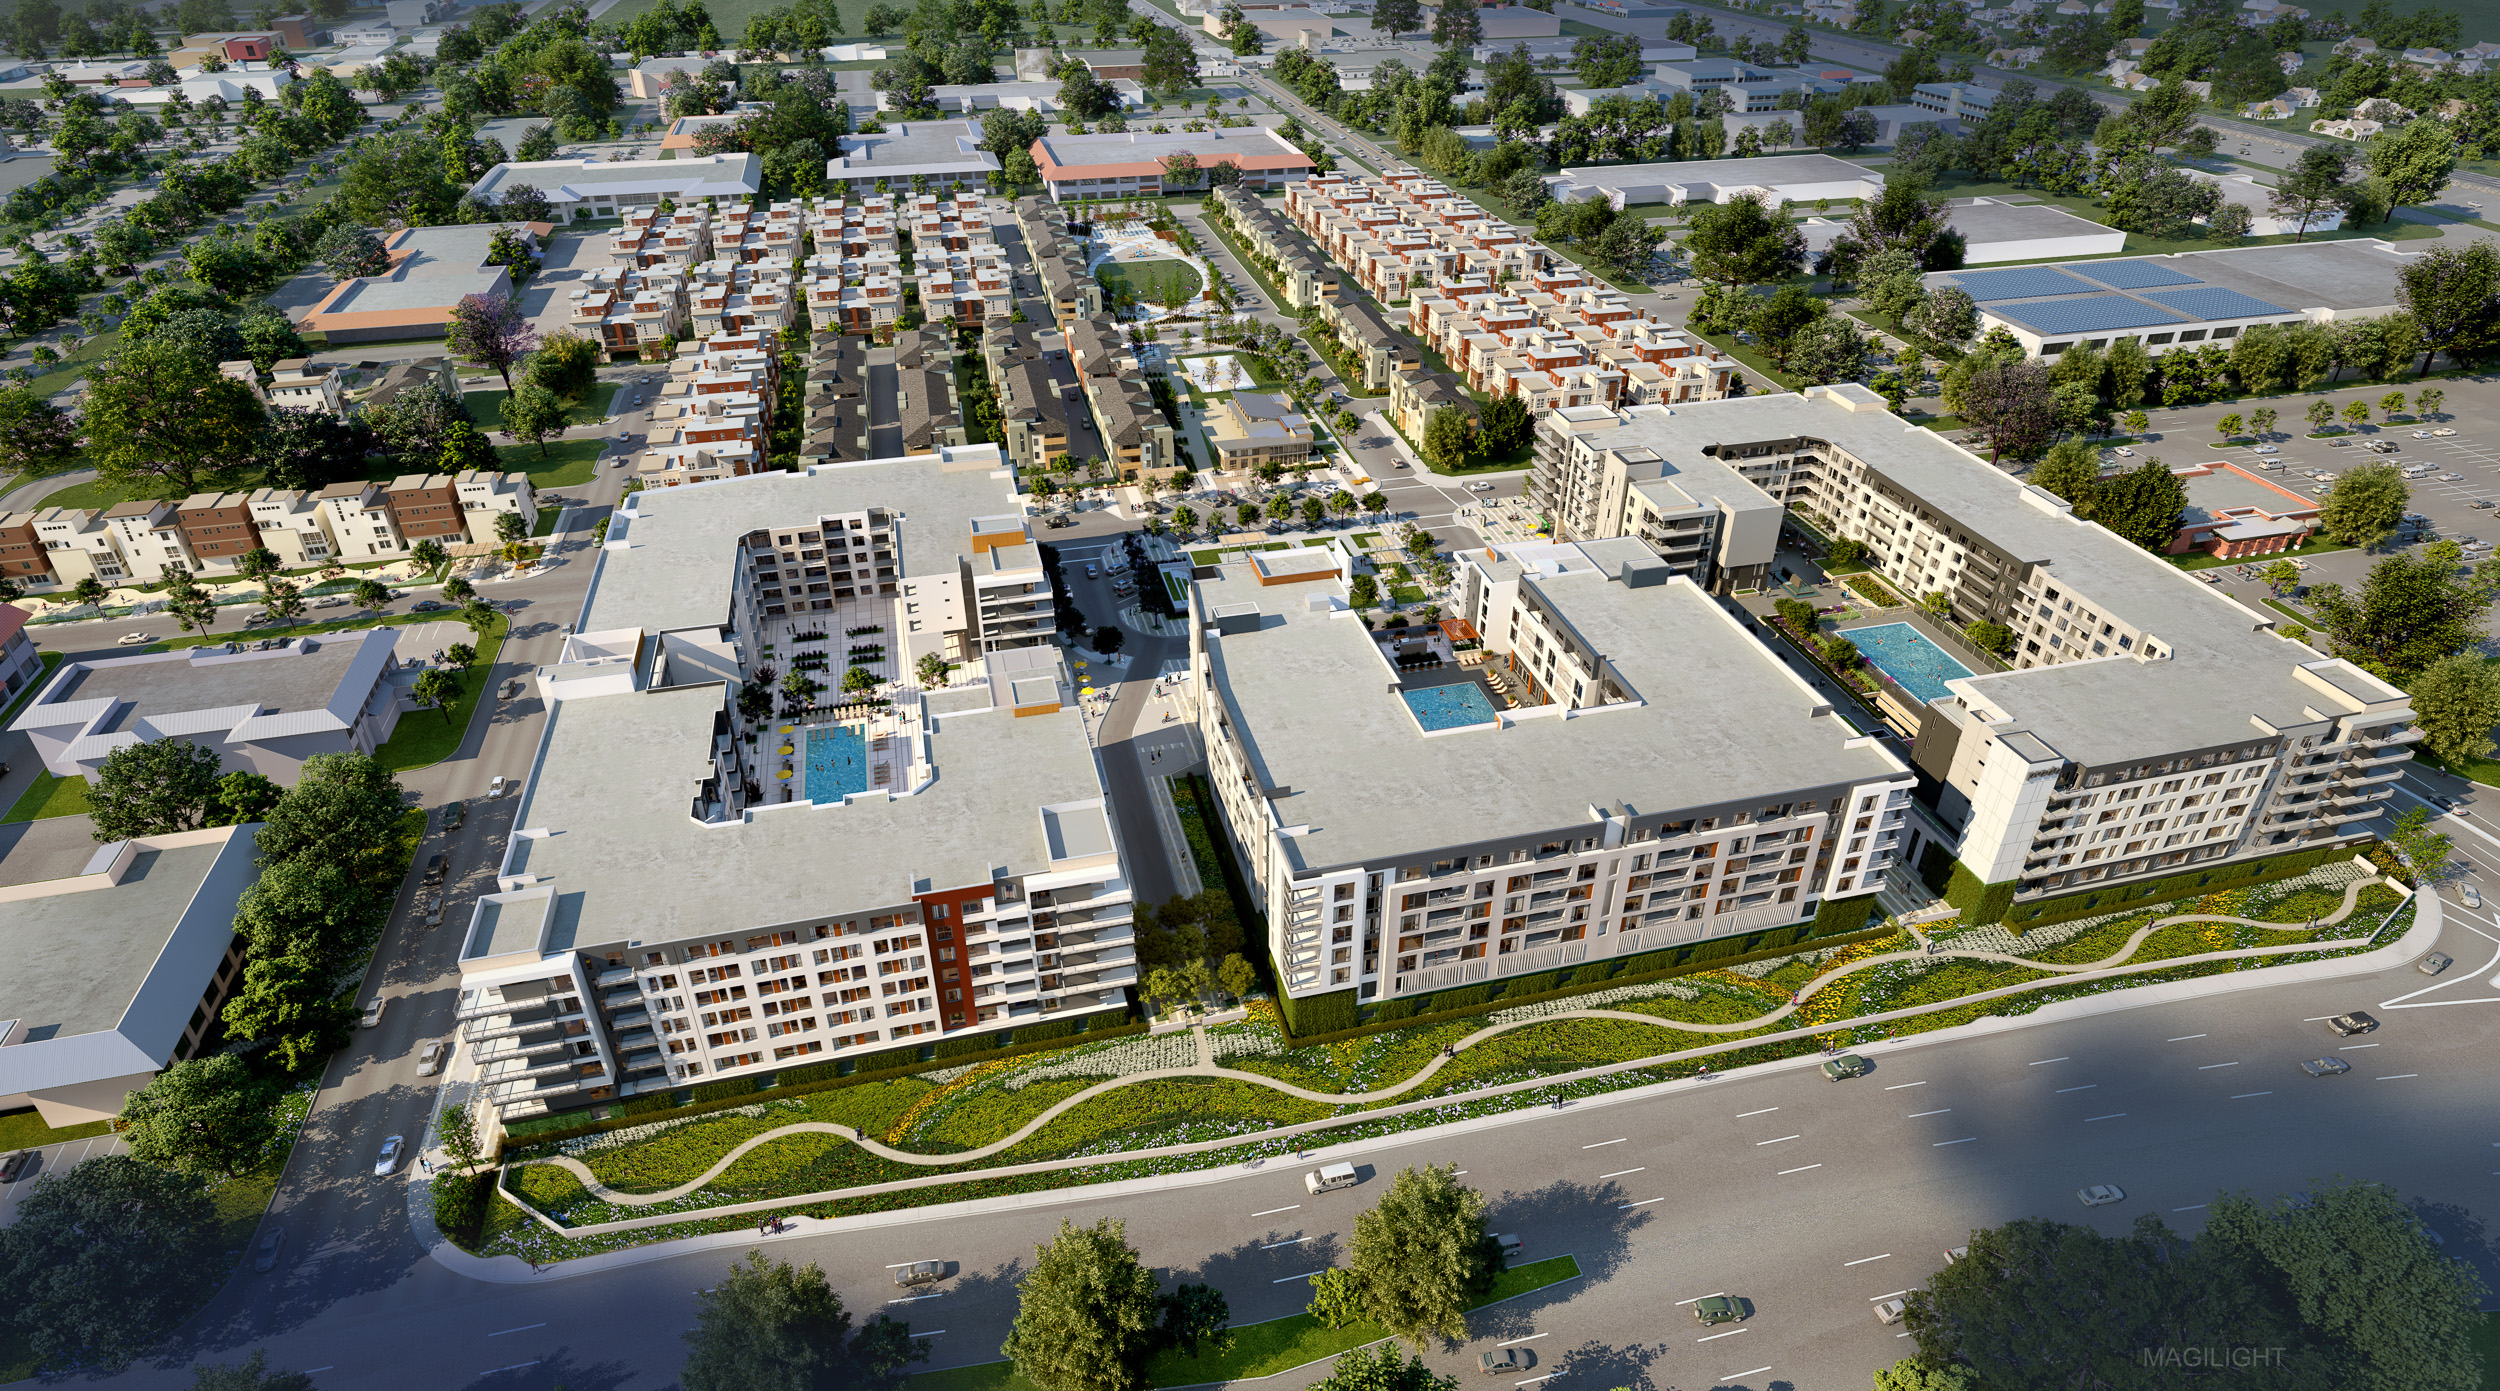 NUEVO Apartments aerial view, rendering courtesy SummerHill Homes